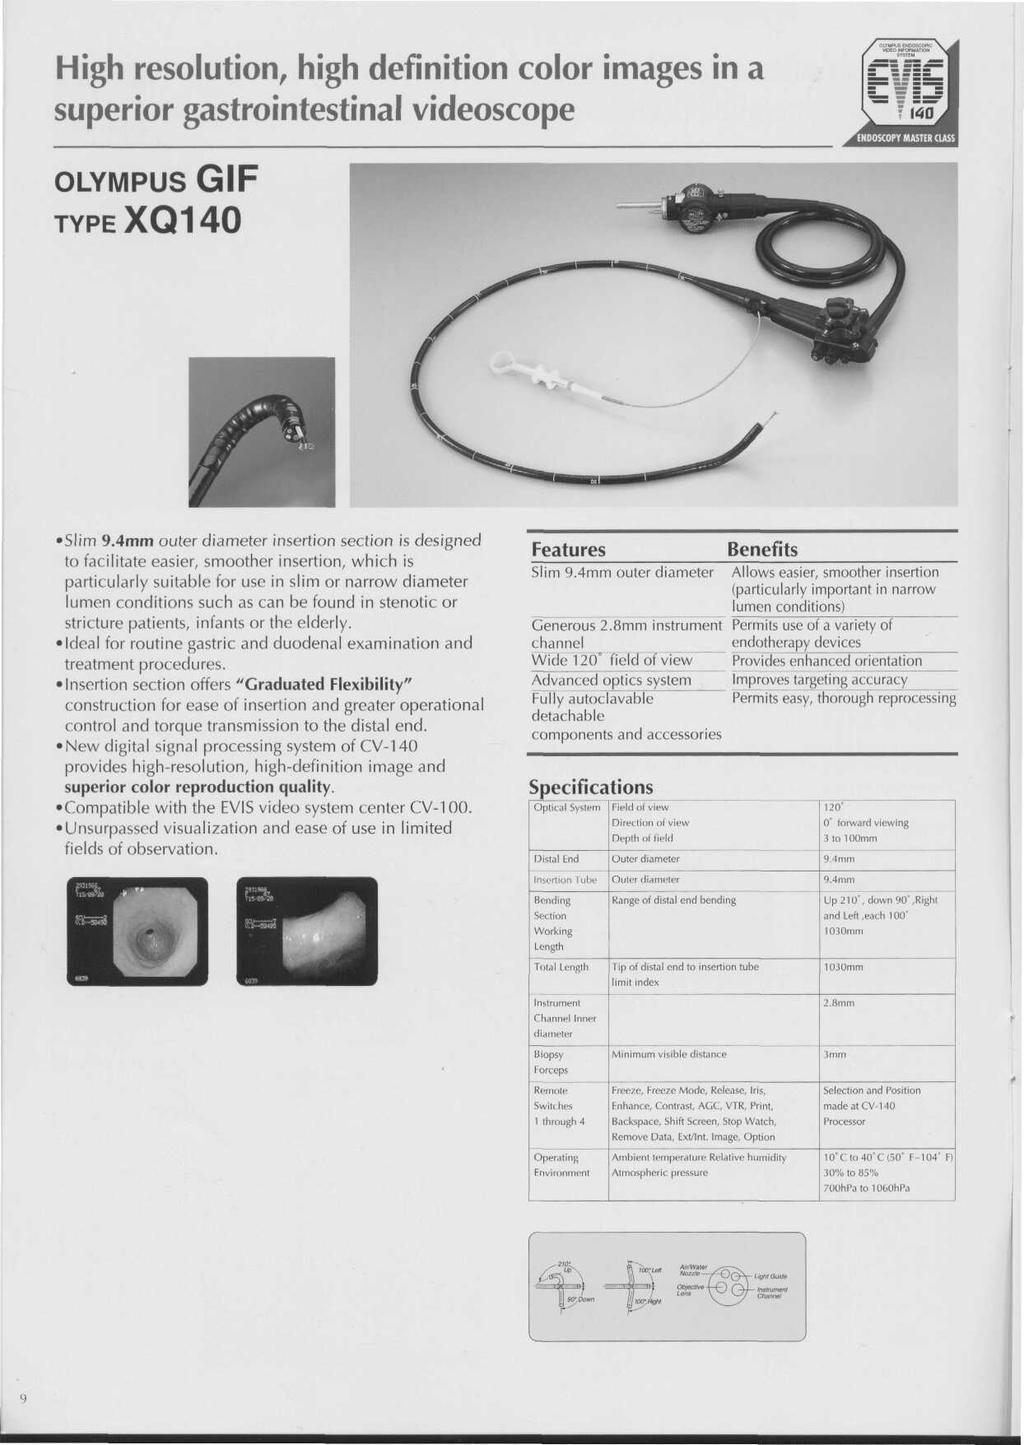 High resolution, high definition color images in a superior gastrointestinal videoscope OLYMPUS GIF TYPEXQ140 Slim 9.